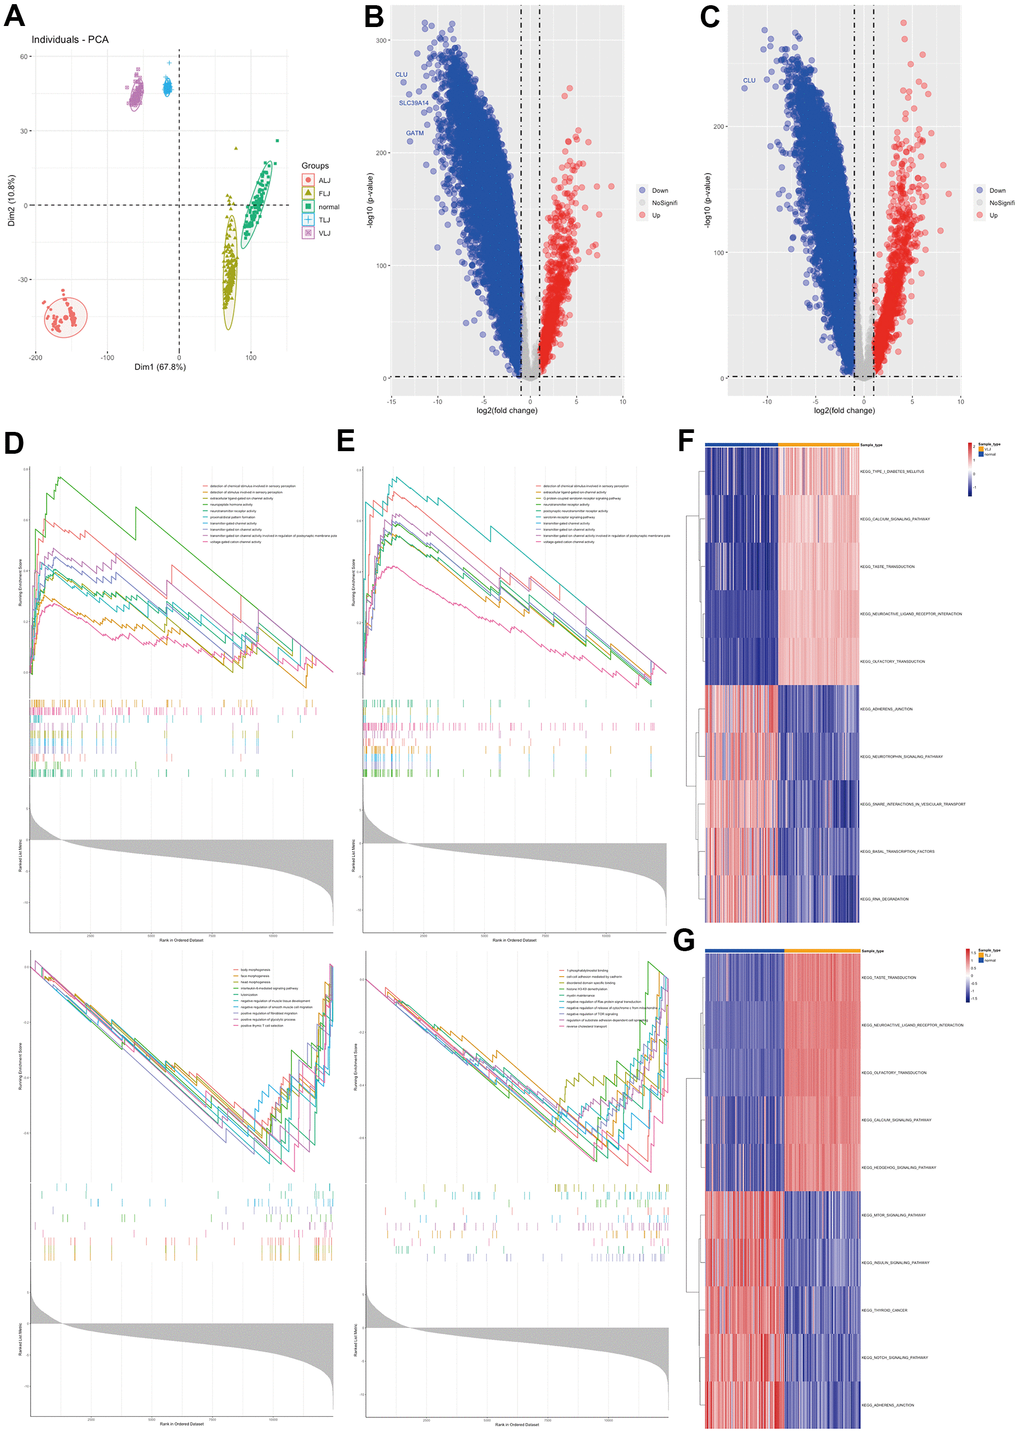 Molecular characterisation of VLJ and TLJ (A) PCA analysis of liver injury and normal. (B) Differential gene analysis of VLJ. (C) Differential gene analysis of TLJ. (D) GSEA analysis of VLJ based on GO gene set. (E) GSEA analysis of TLJ based on GO gene set. (F) GSVA analysis of VLJ based on KEGG pathway set. (G) GSVA analysis of TLJ based on KEGG pathway set.